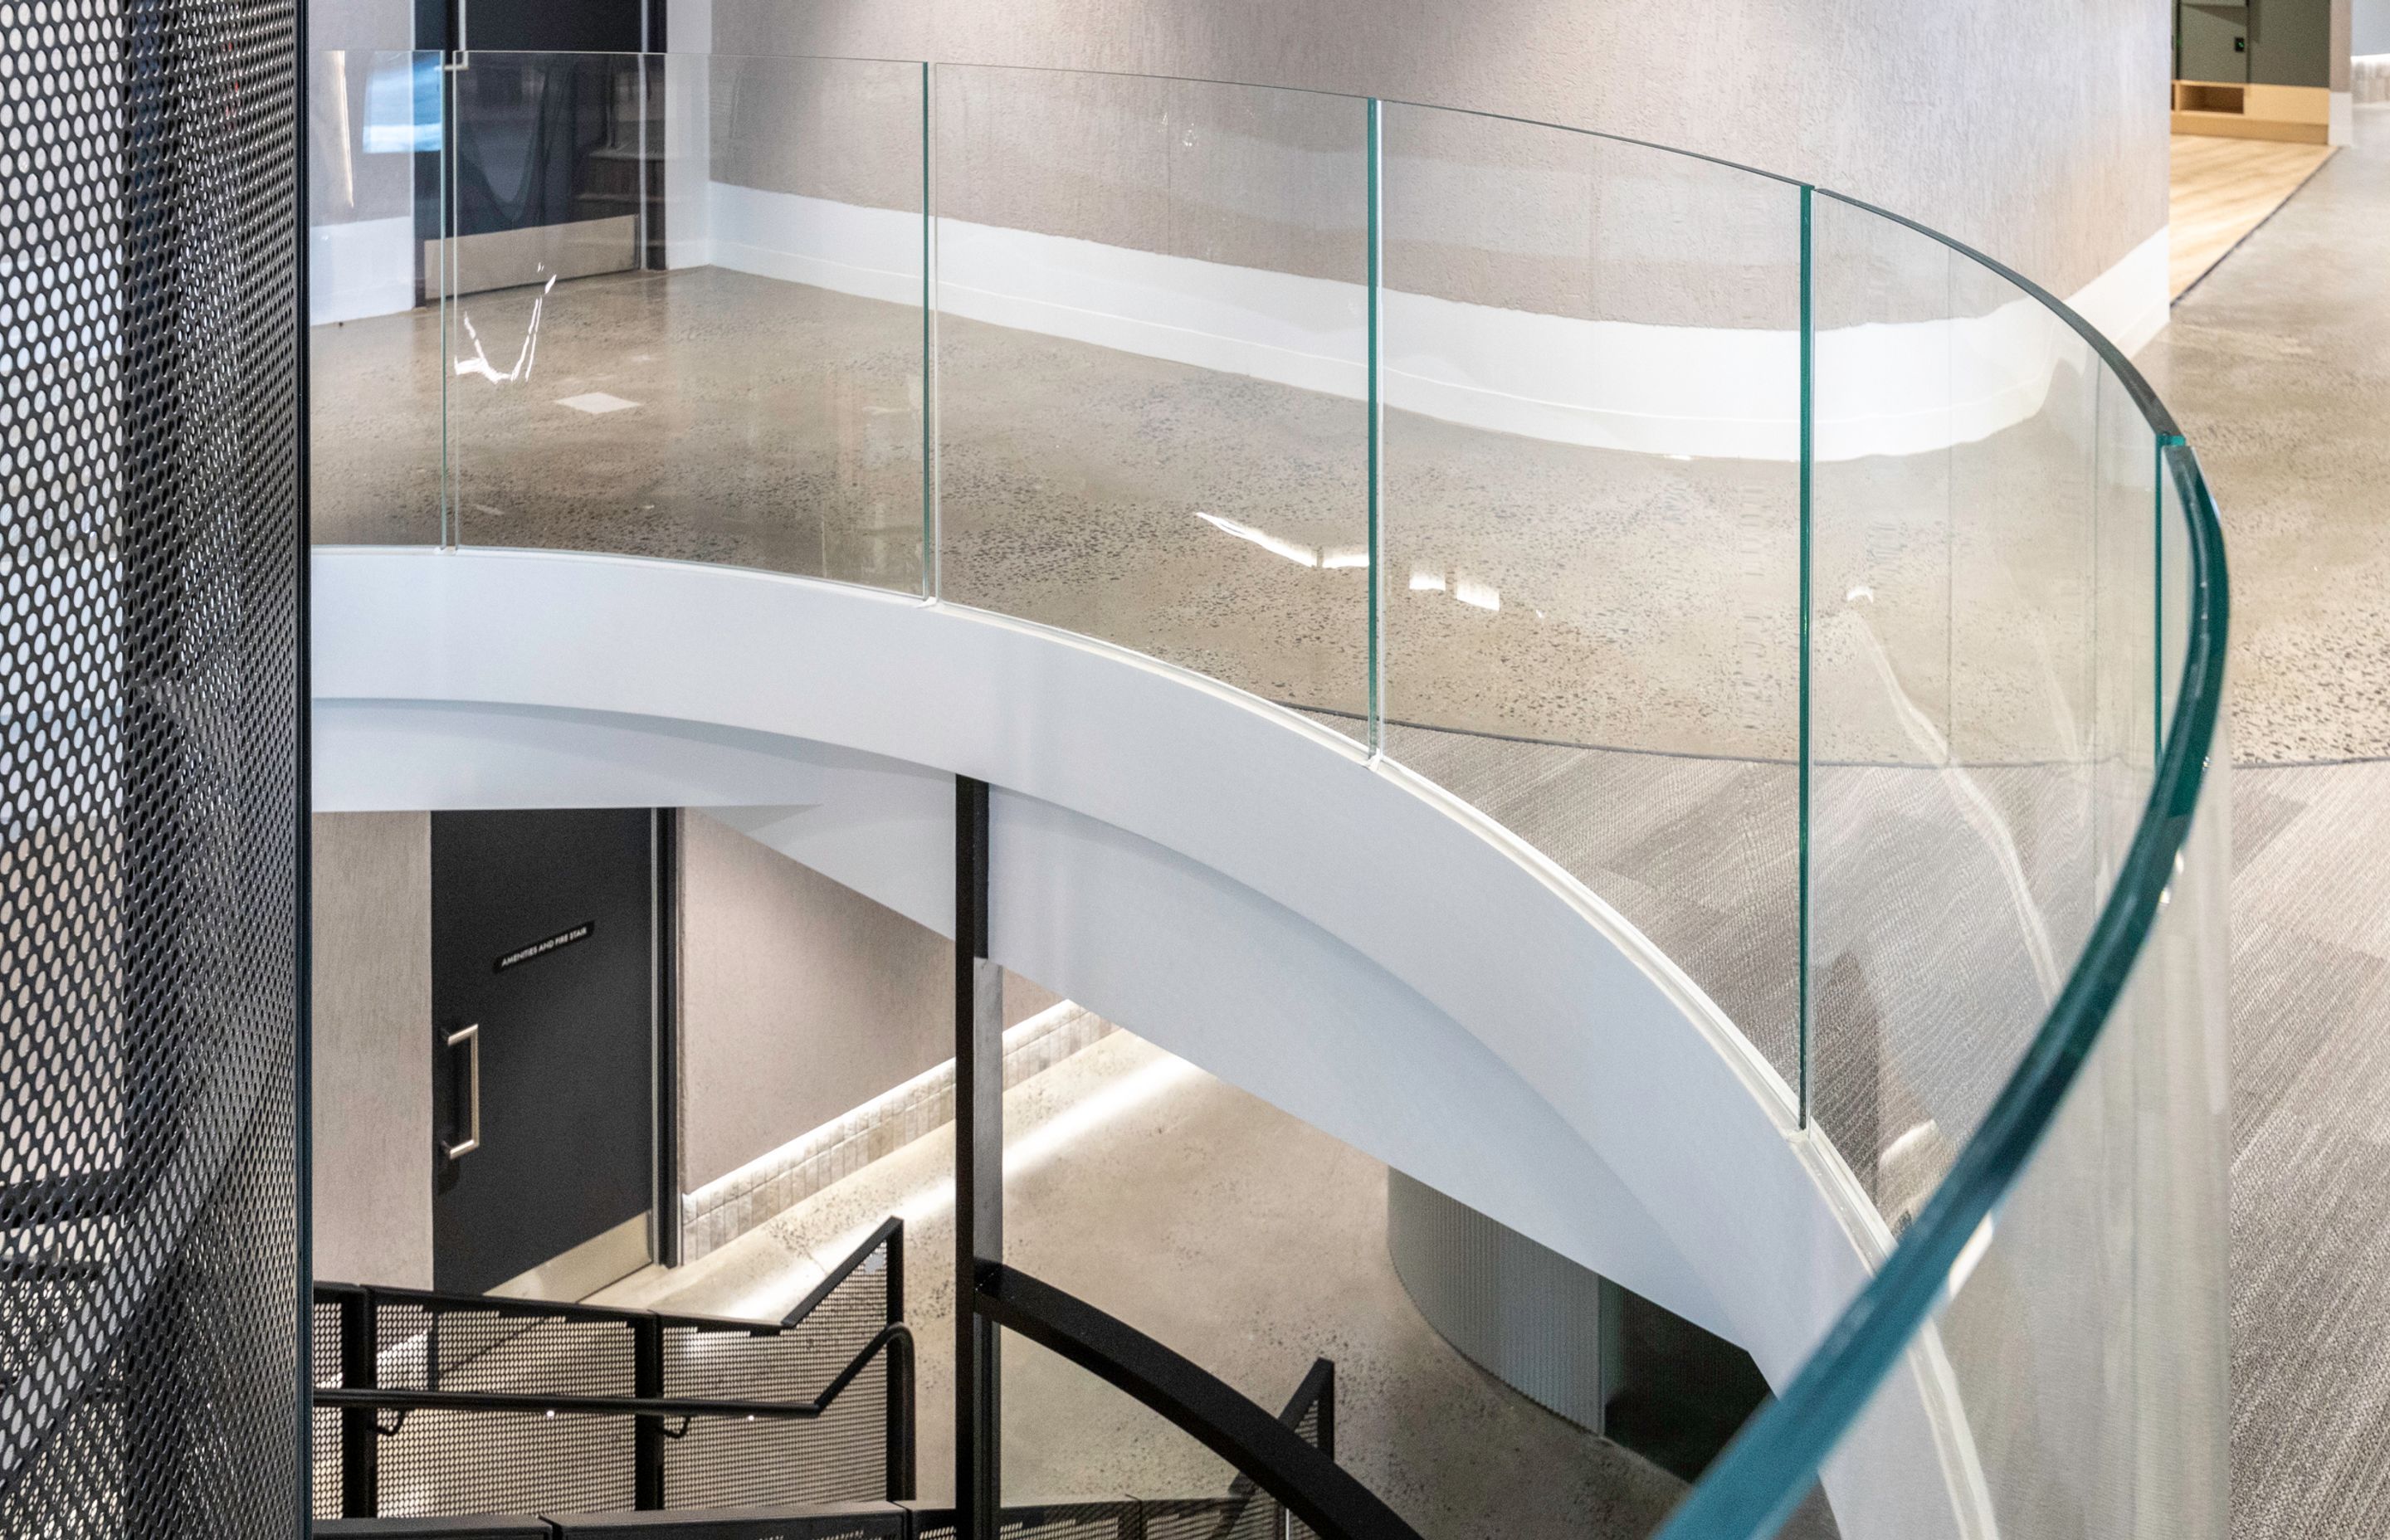 This curved balustrade doesn’t require a handrail, allowing a seamless transition between the glazing and steel components.